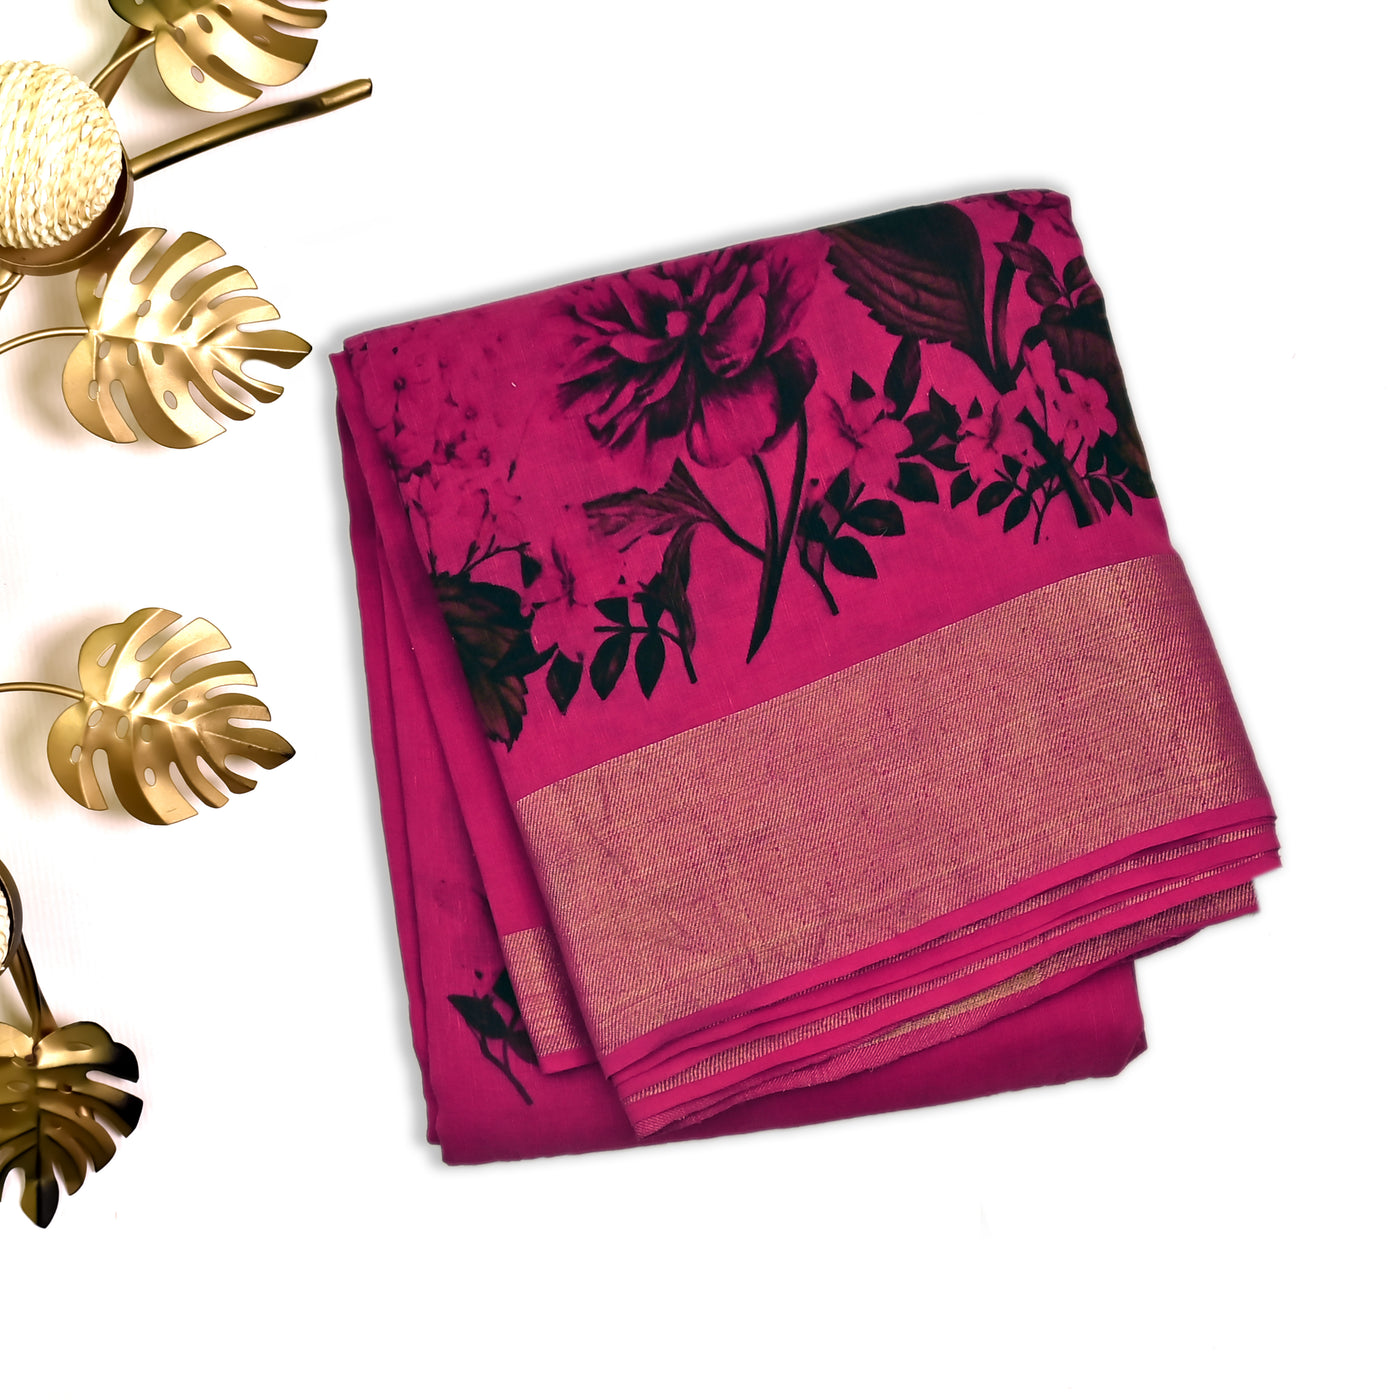 Red Tussar Silk Saree with Flower Printed Design